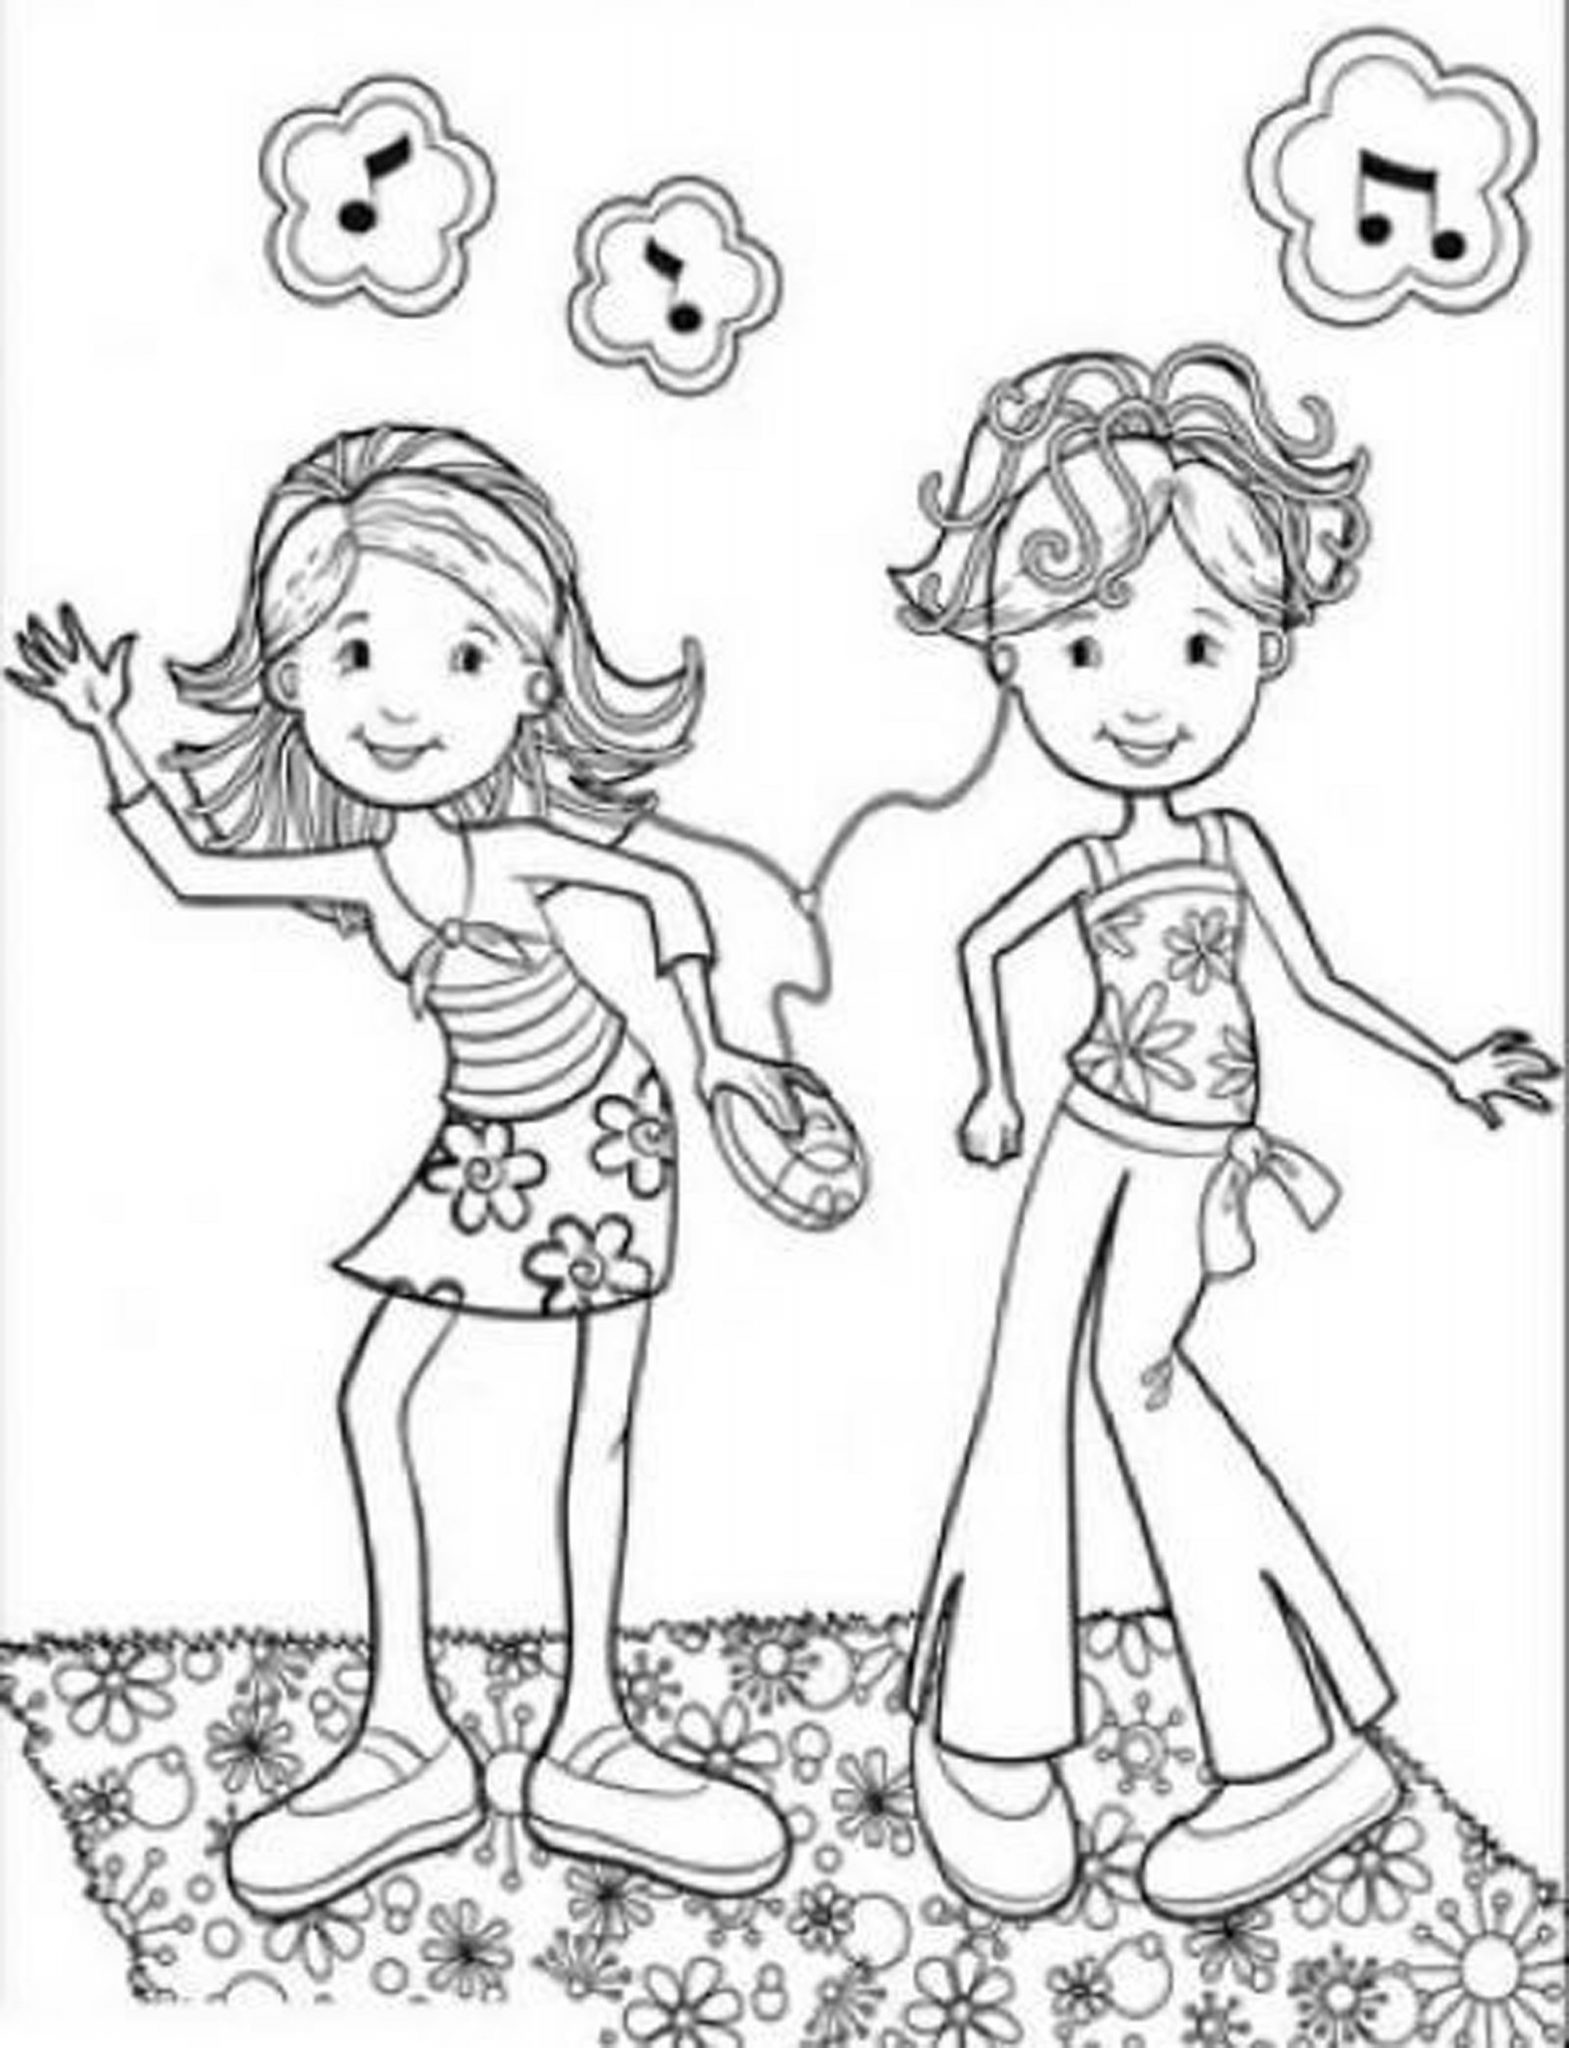 Coloring Pages Of Pretty Girls
 cute coloring pages for girls